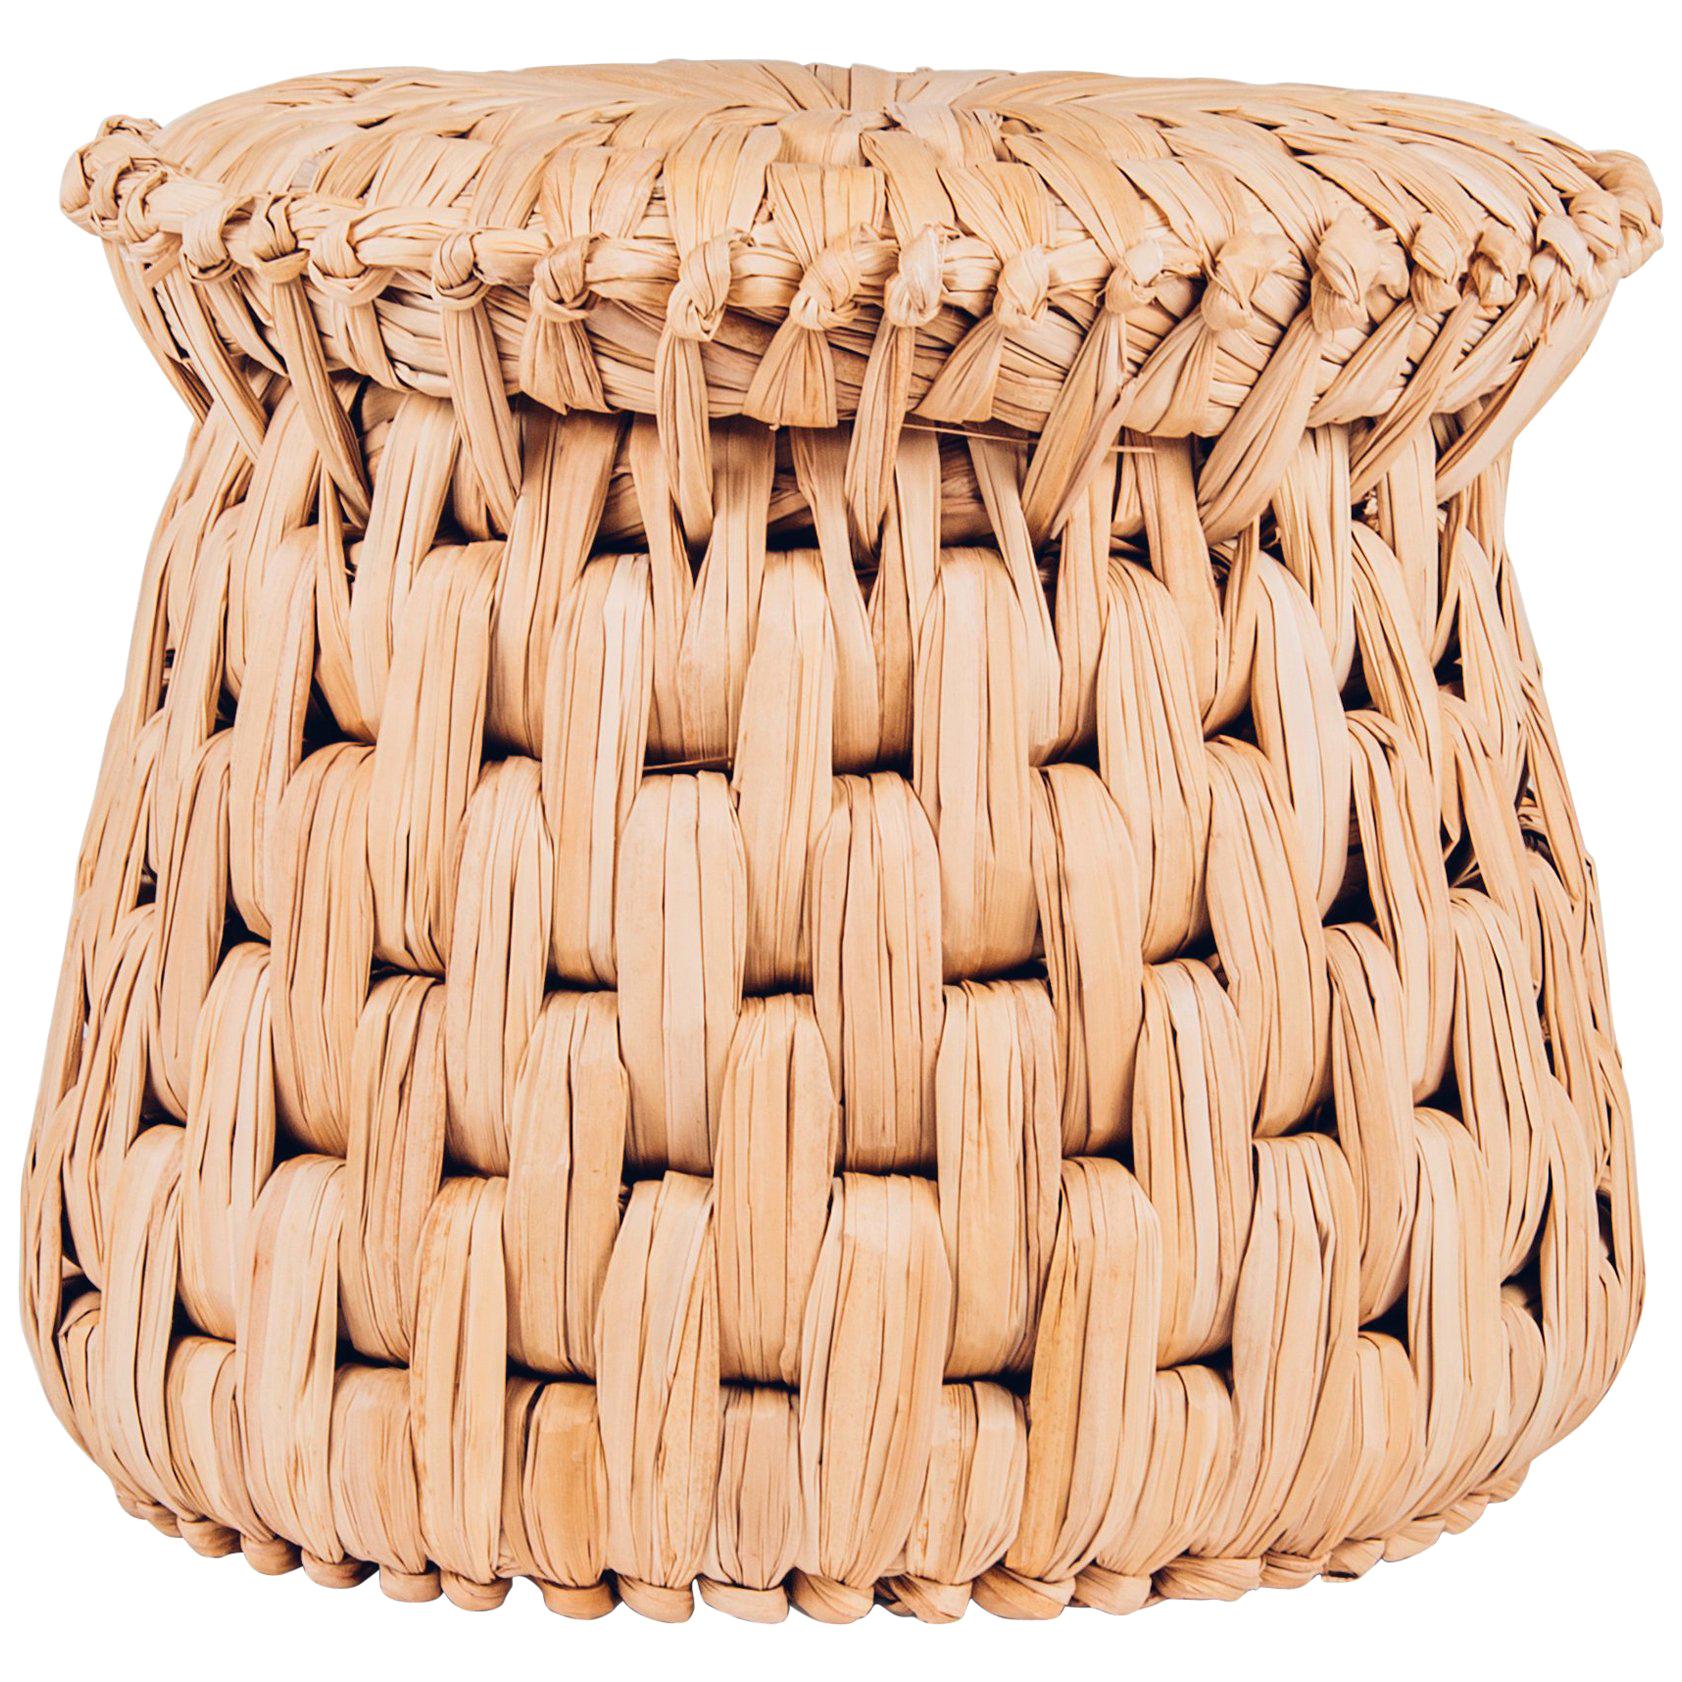 Handwoven Palm 'Icpalli' Stool, made in Mexico by LUTECA